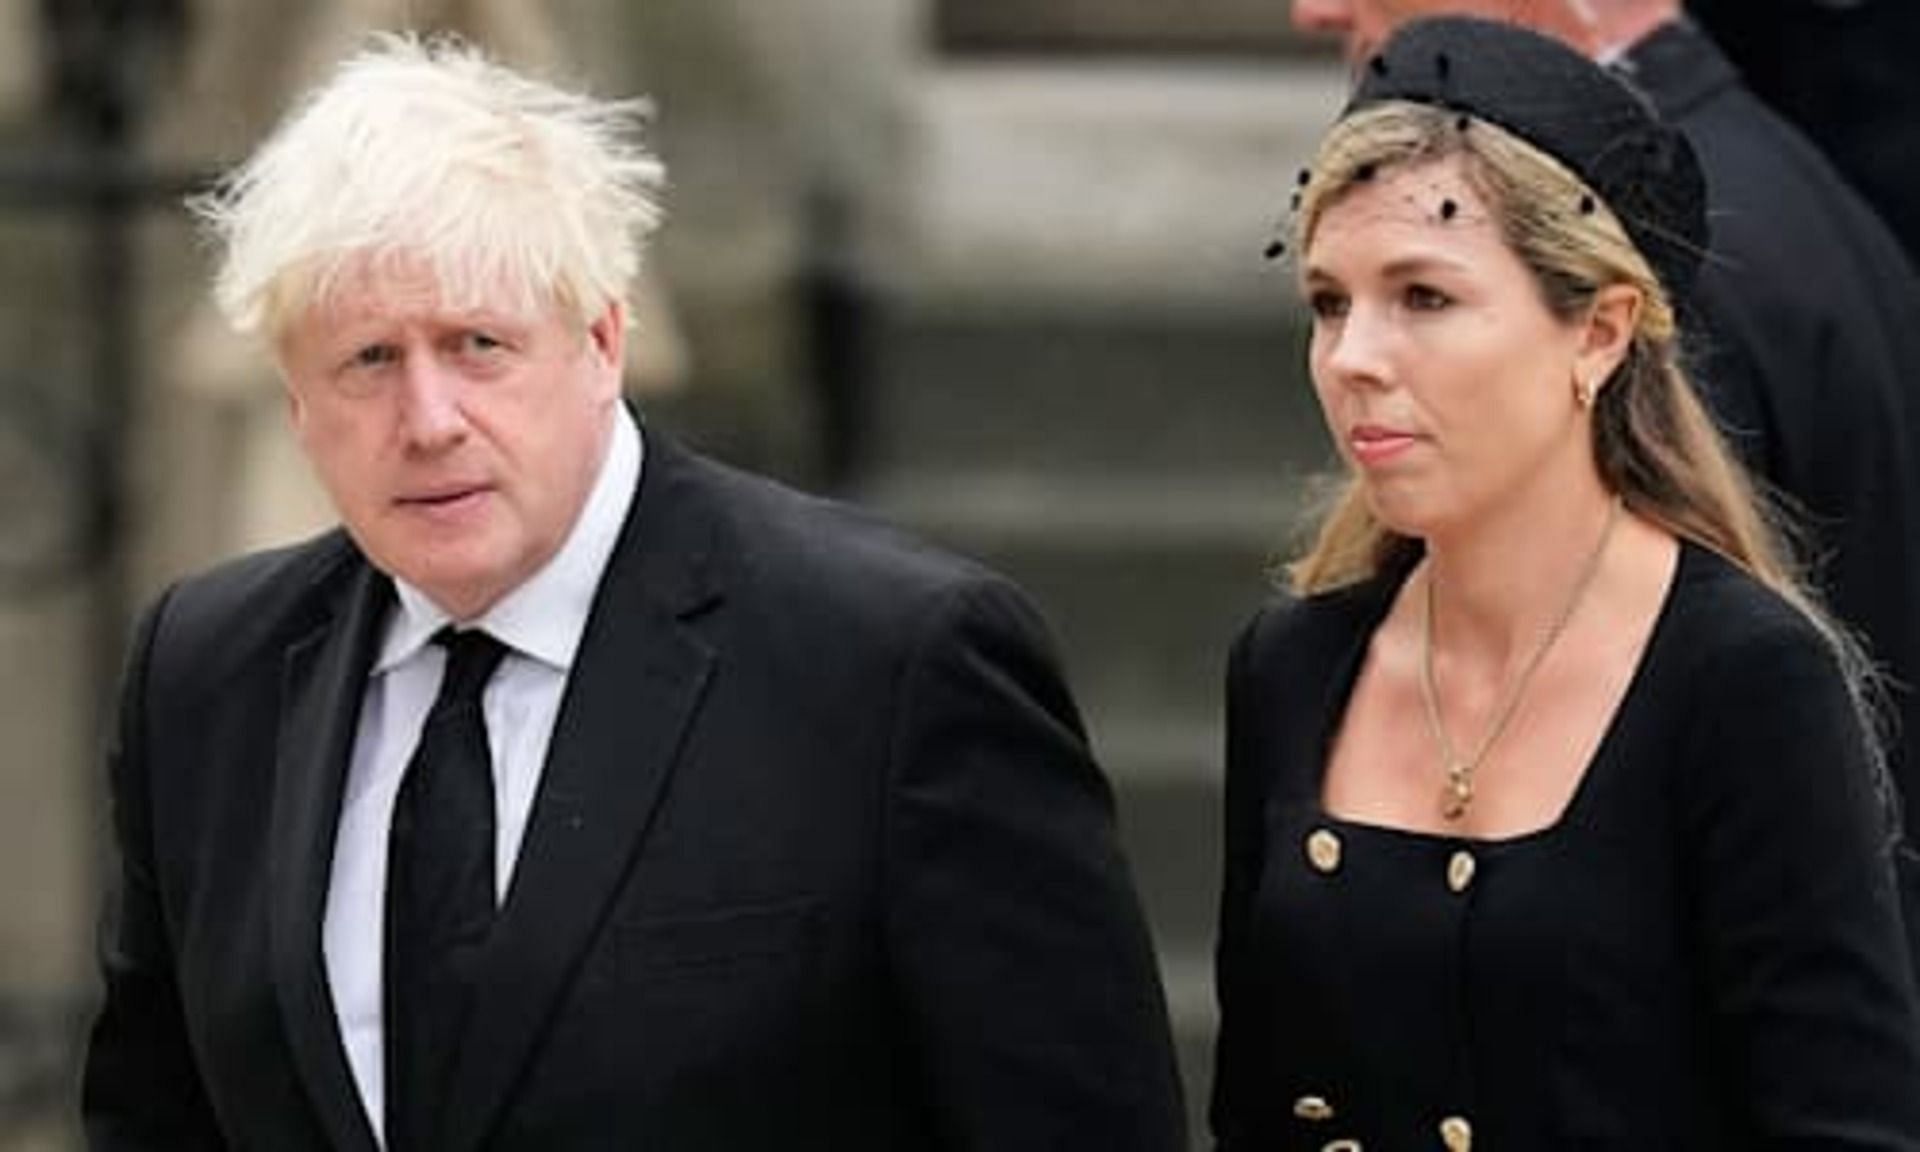 Video claiming Boris Johnson fell over during Queen